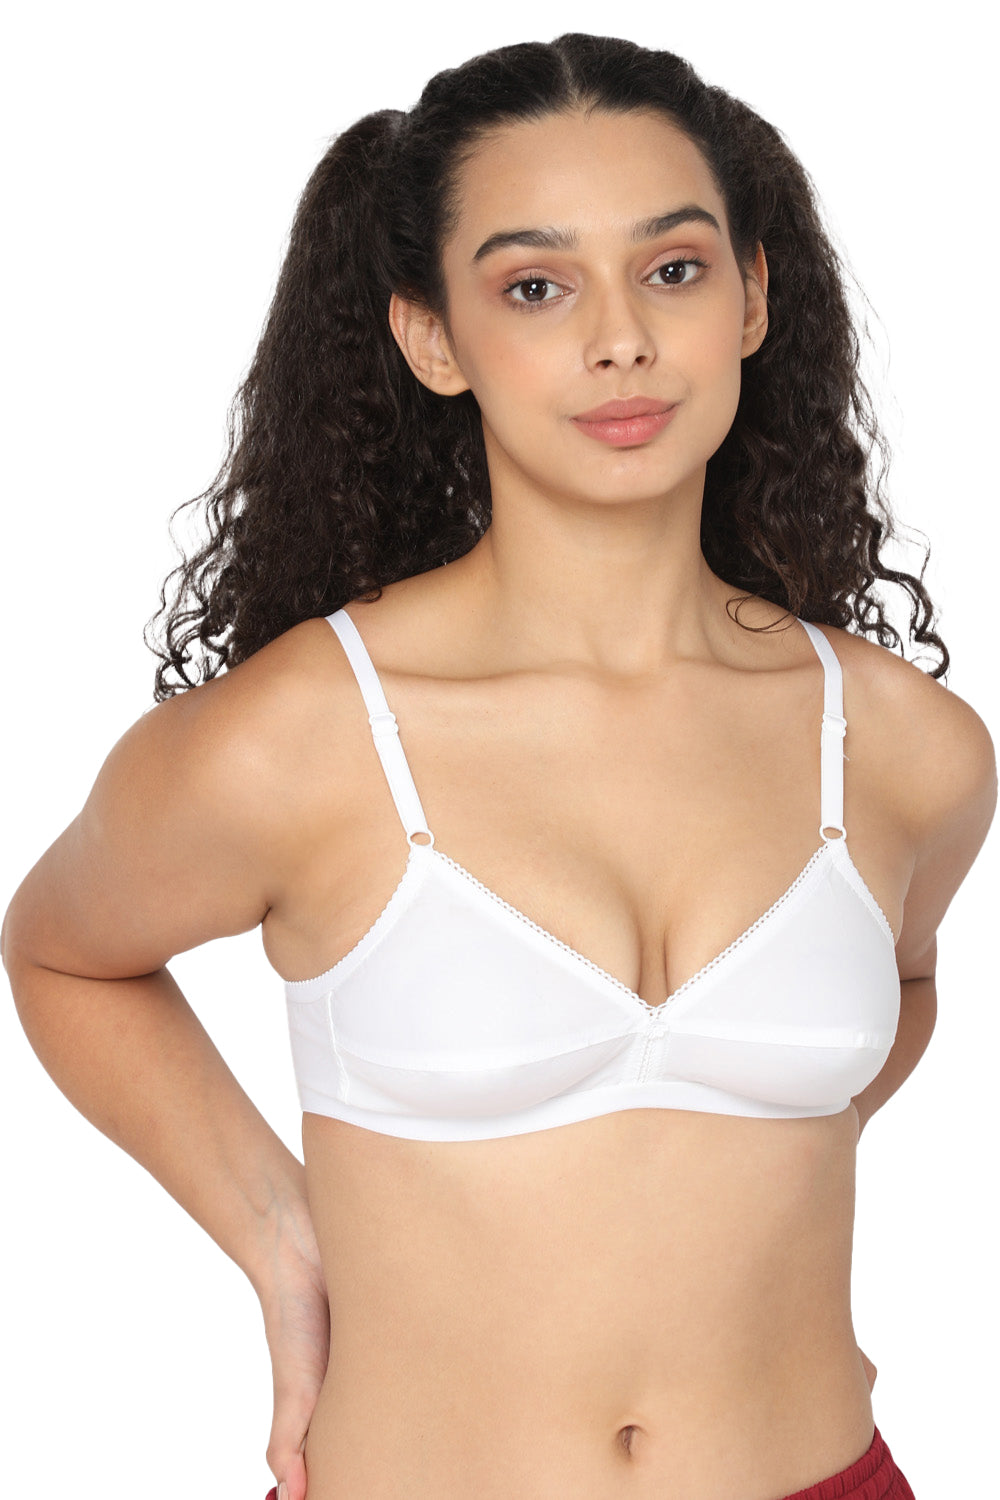 Naidu Hall Heritage-Bra Special Combo Pack - Trend - C38